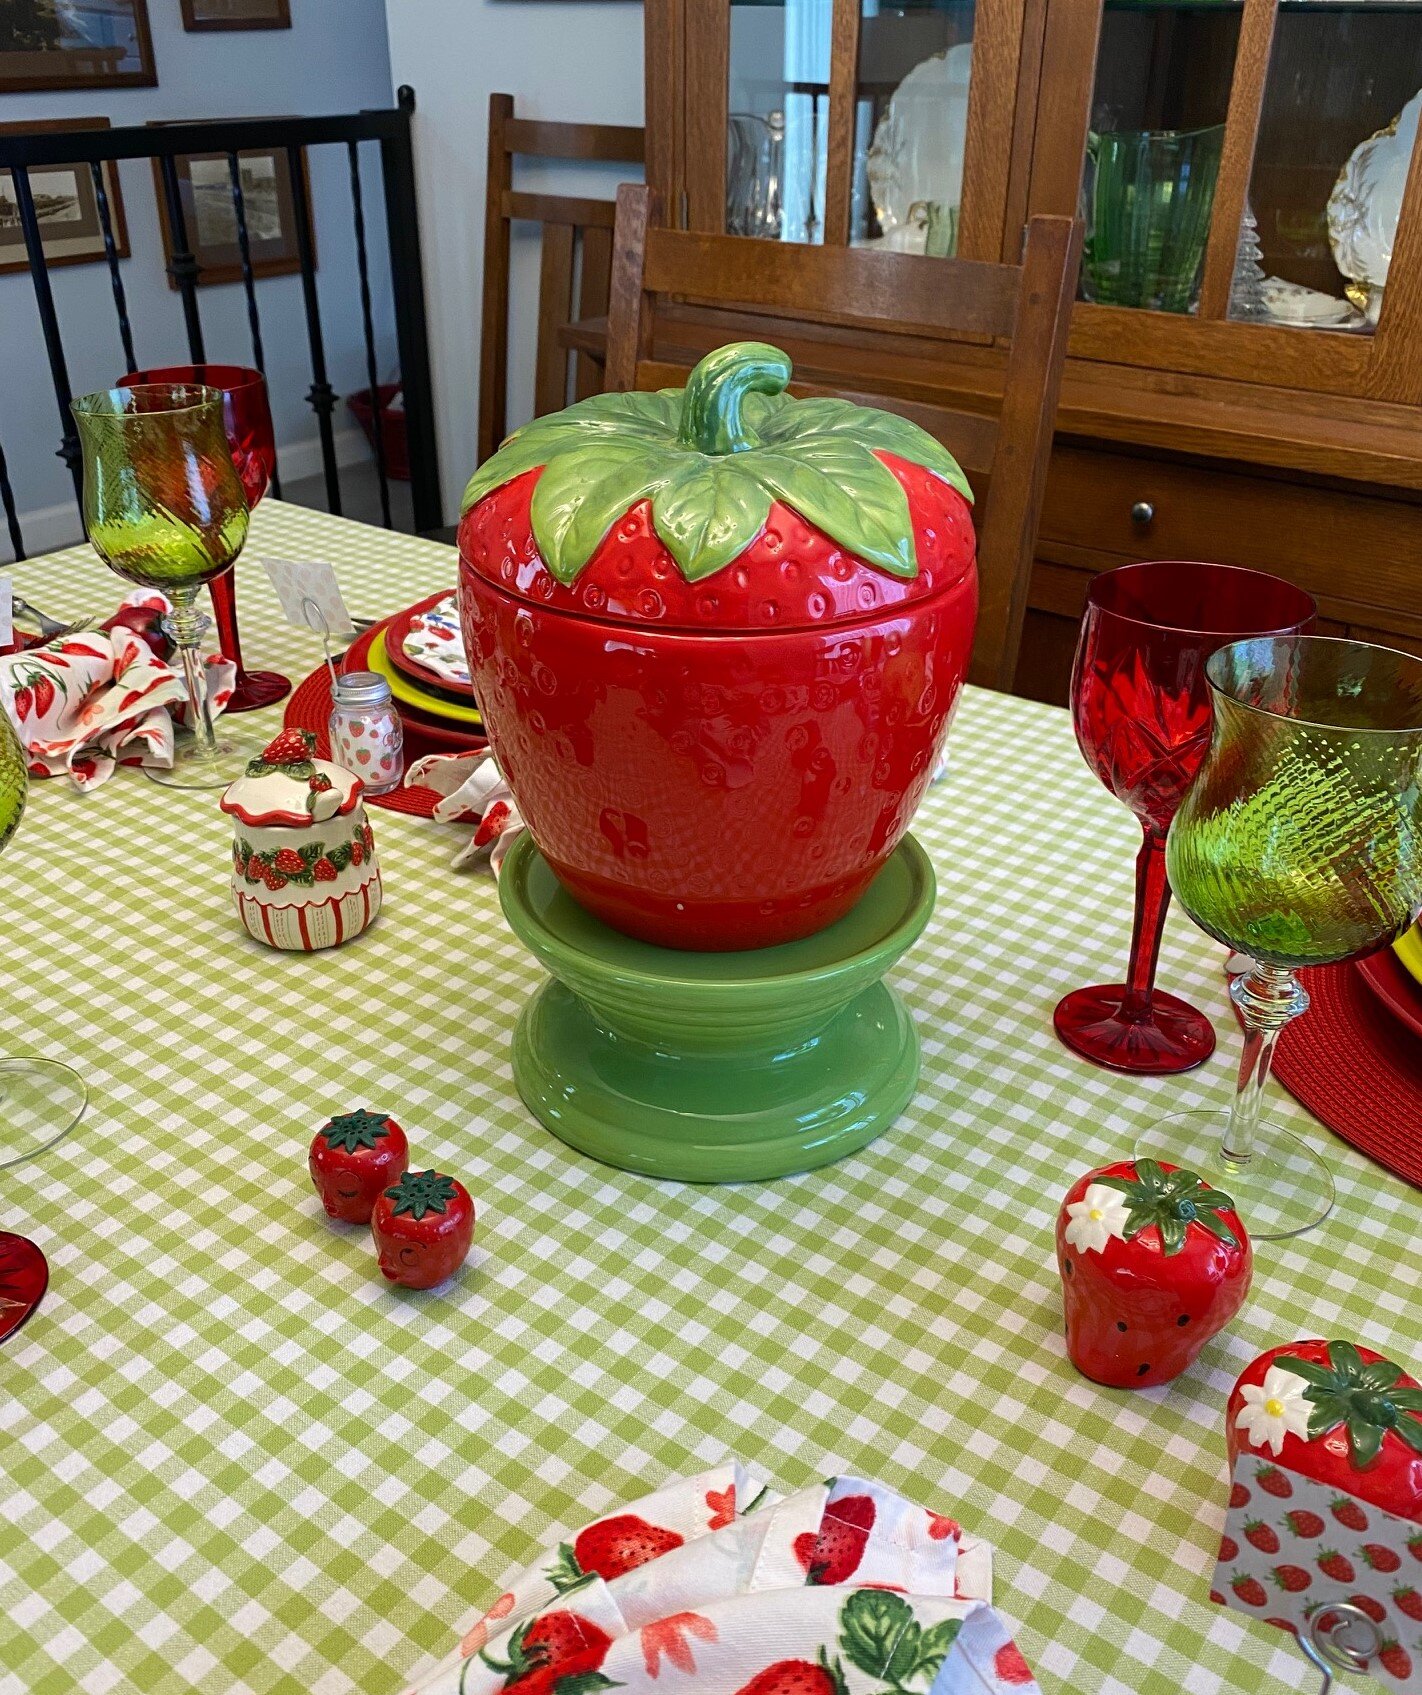 Summer garden party theme – Table decorating ideas with strawberries